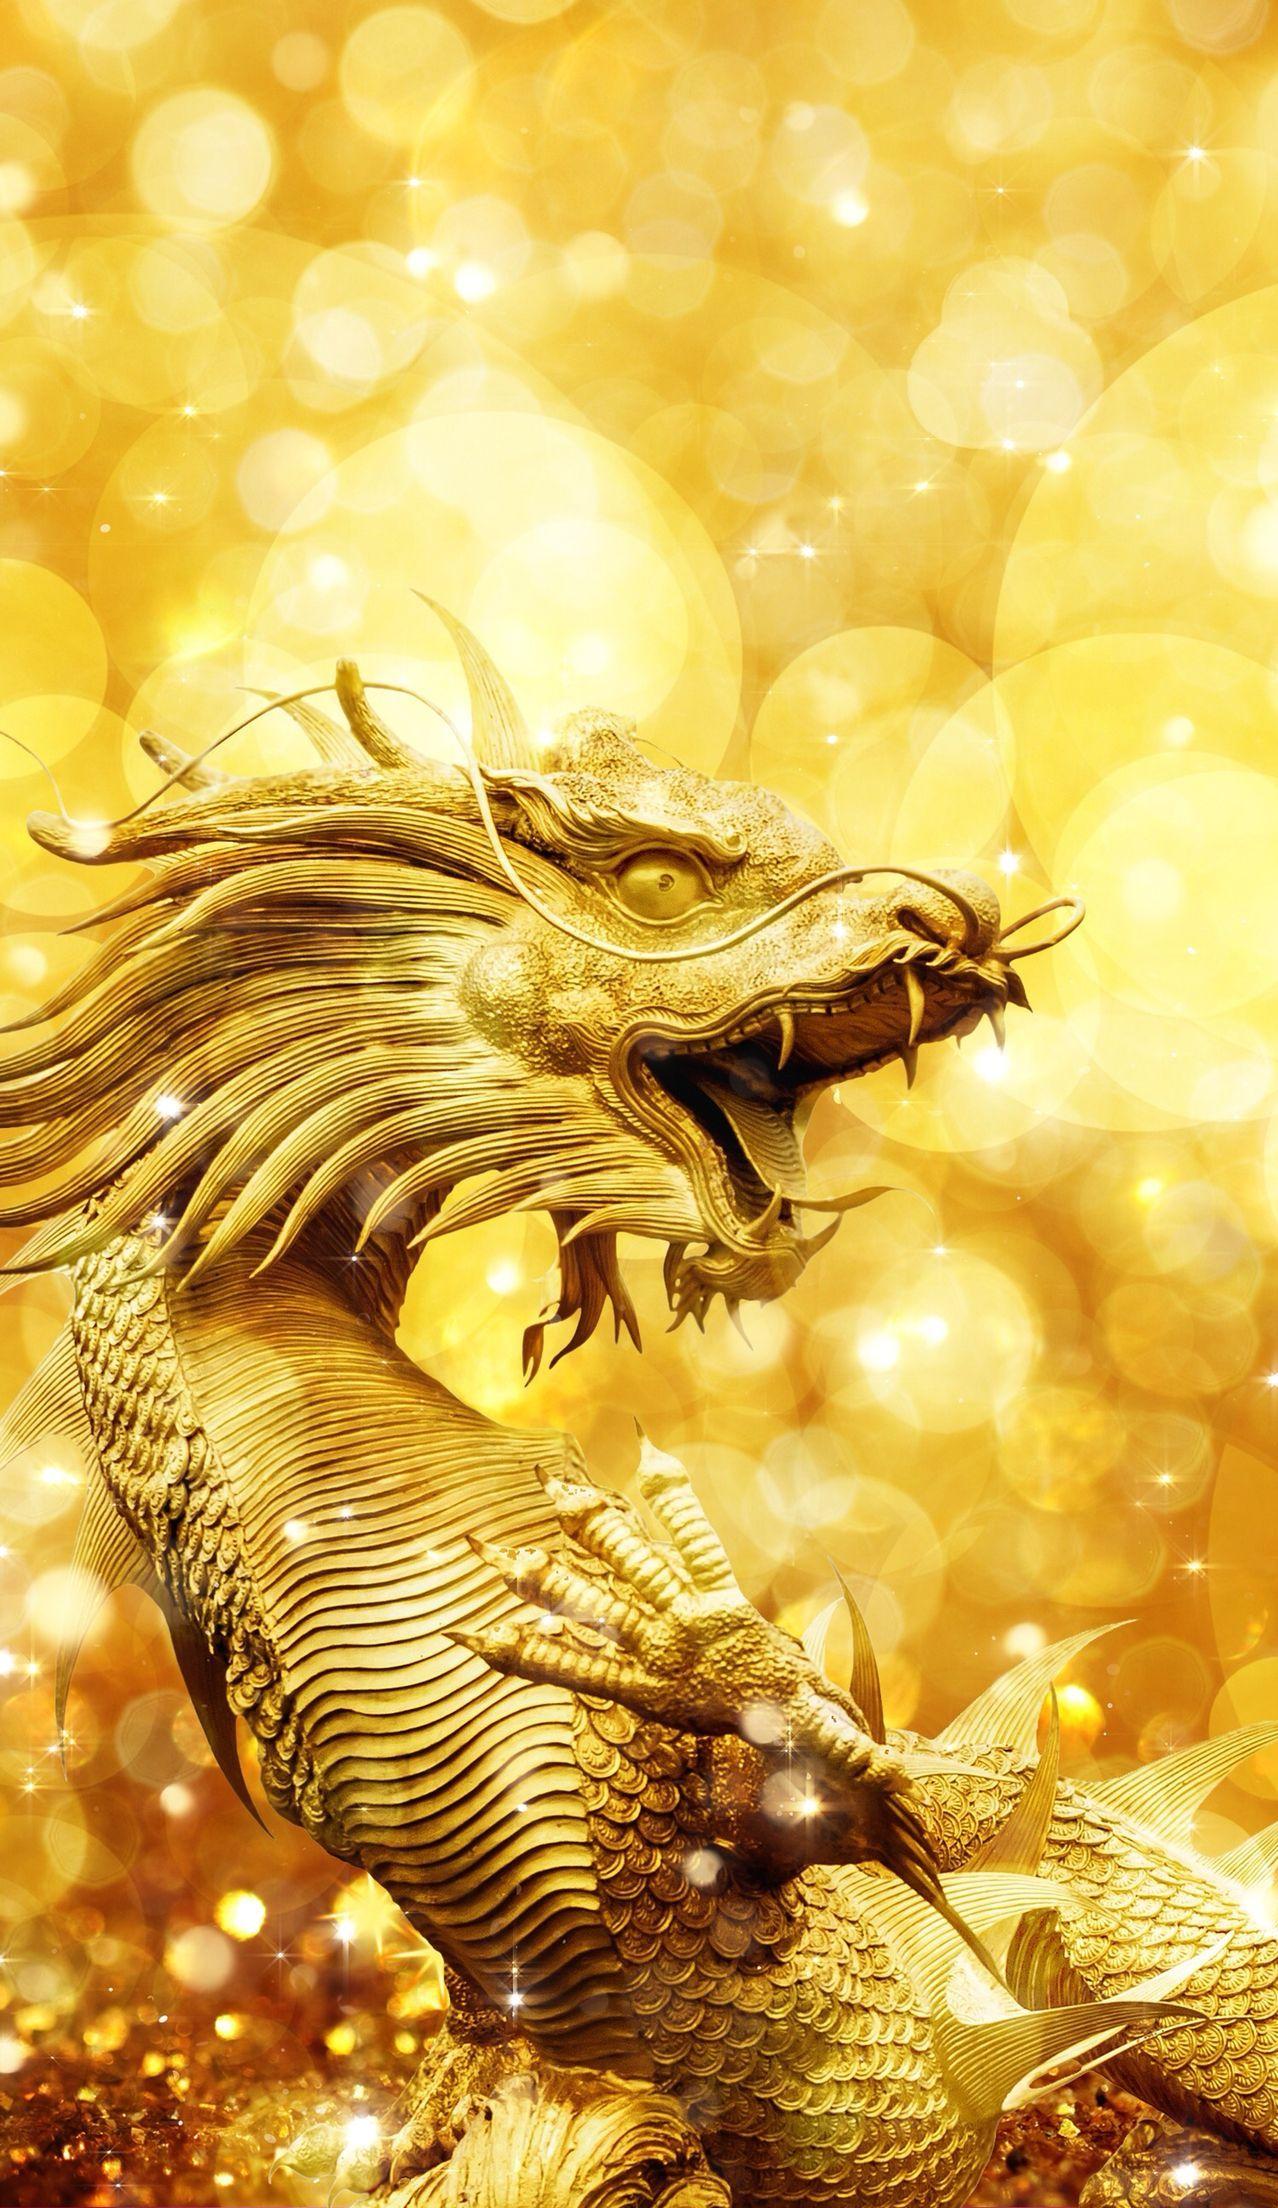 Golden Dragon Background Images HD Pictures and Wallpaper For Free  Download  Pngtree